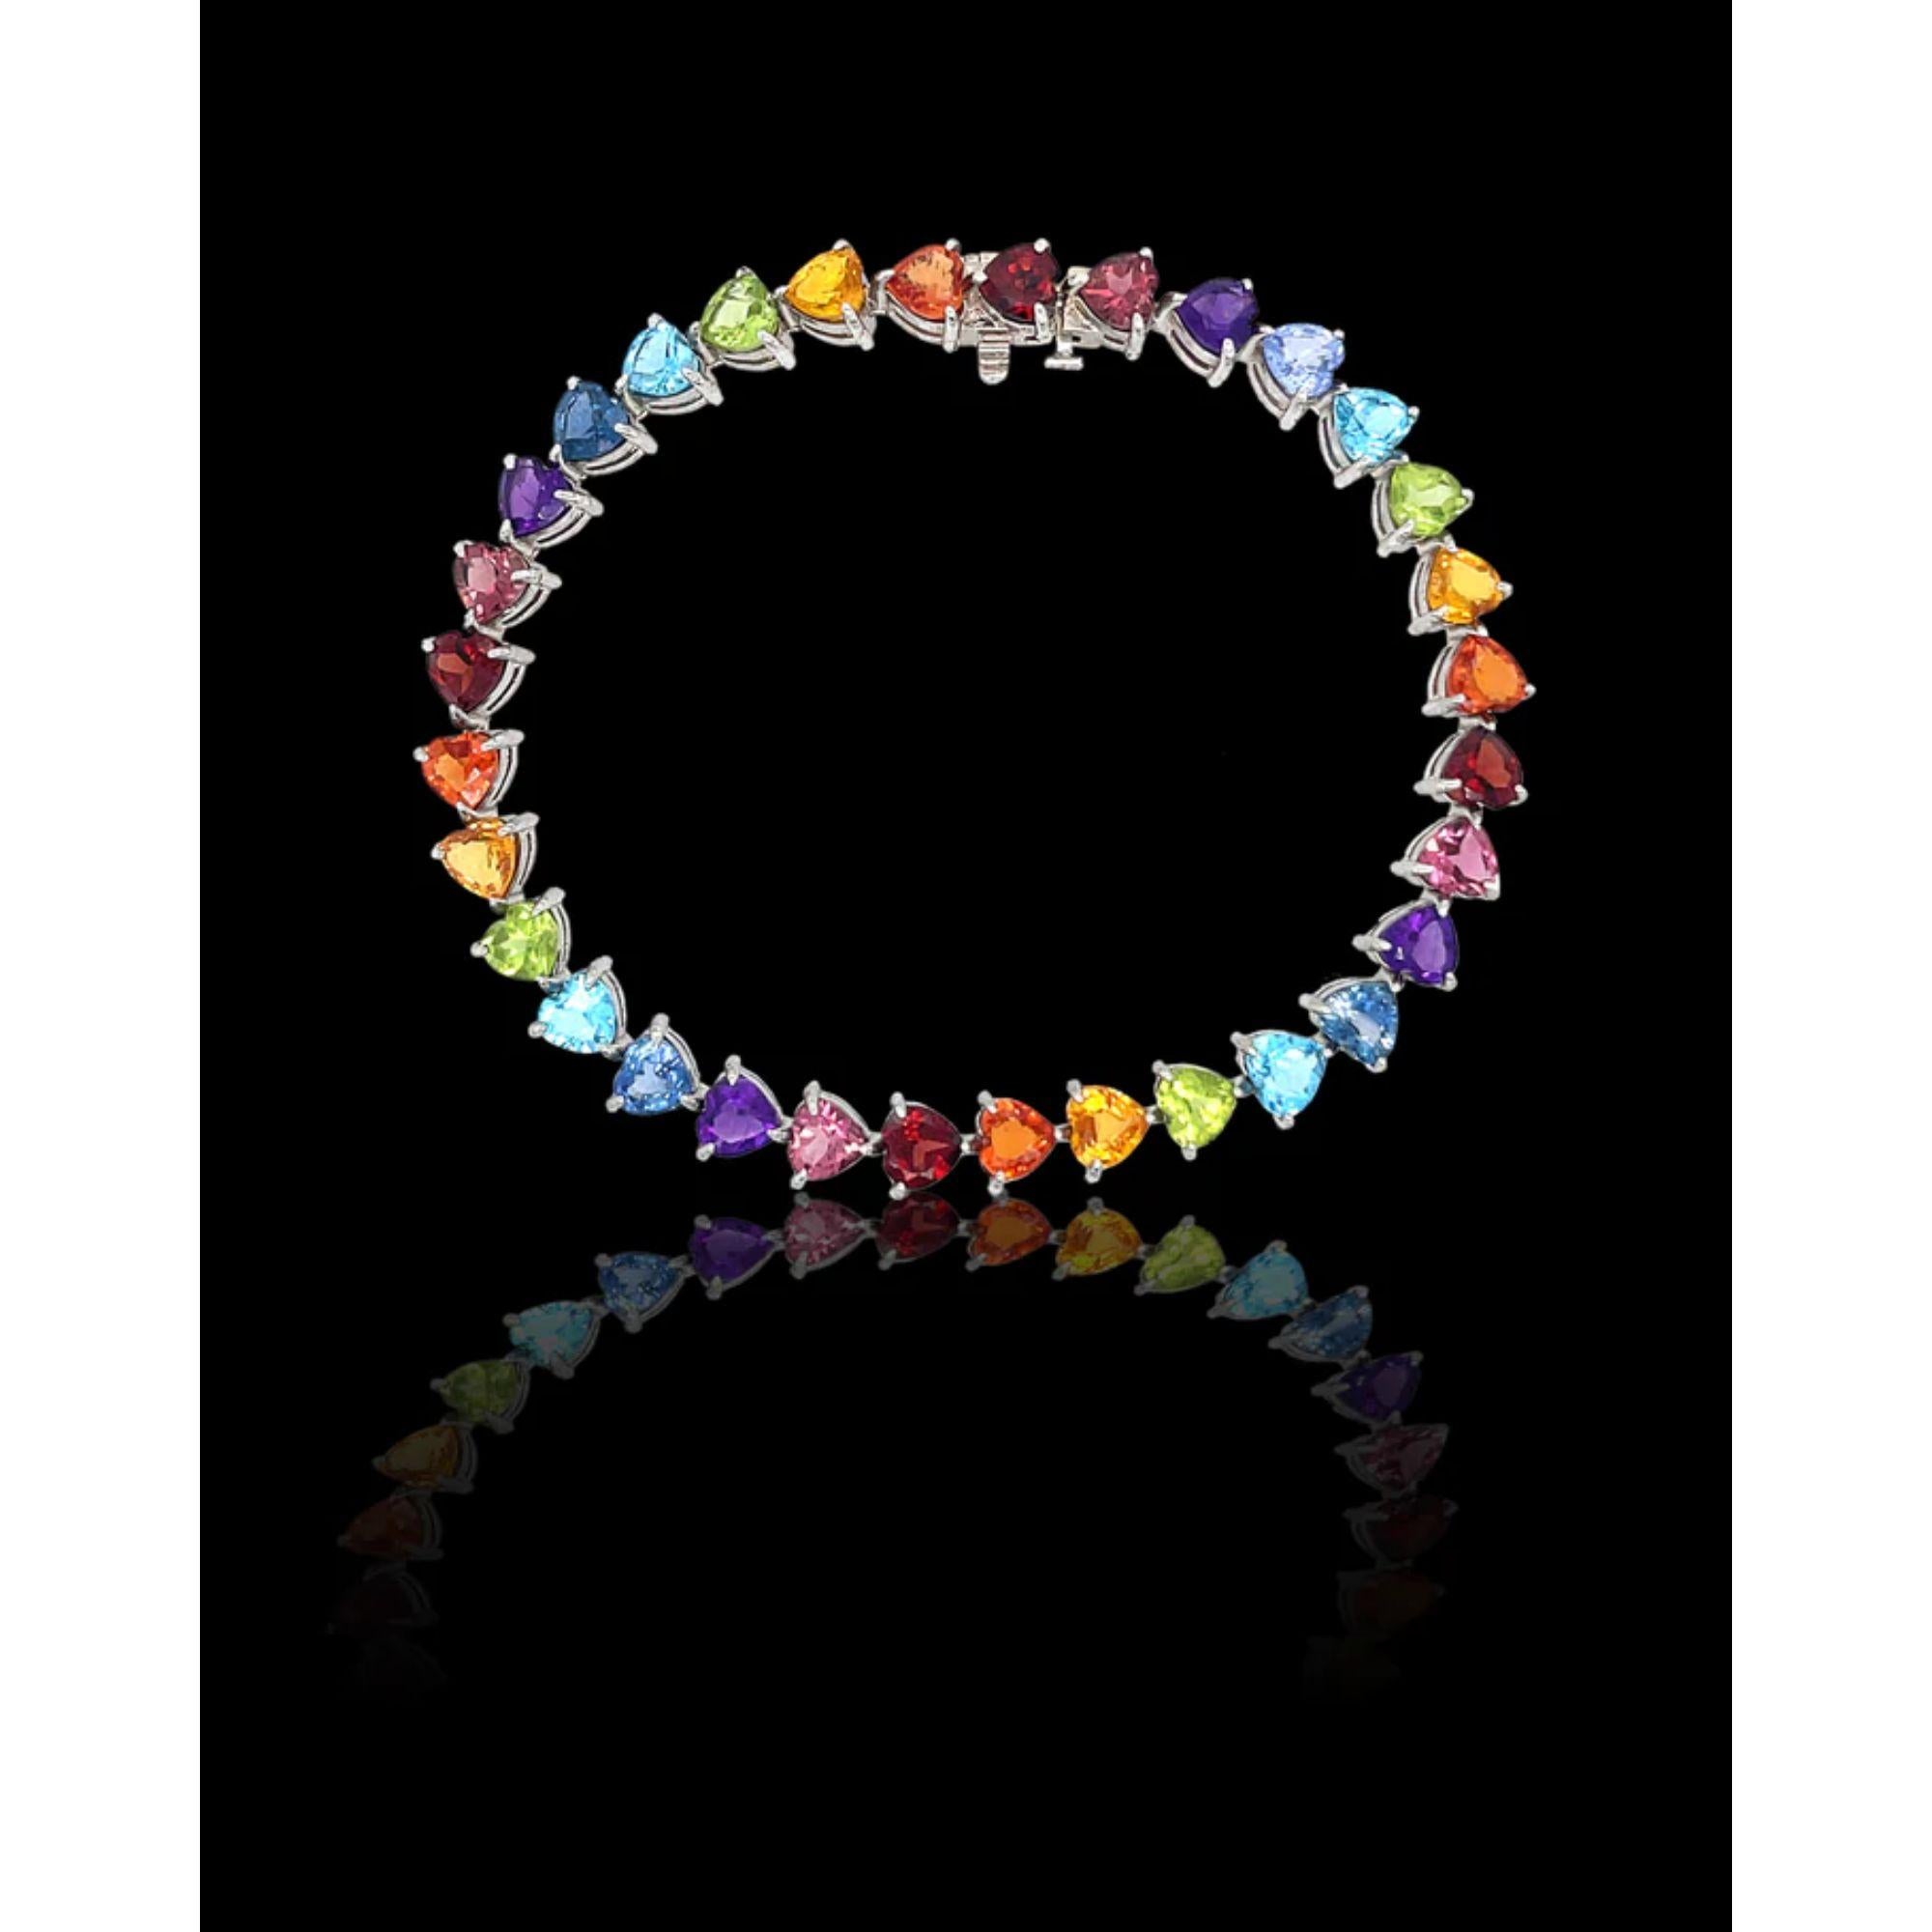 The full rainbow fantasy in the most unique and colorful bracelet to light up your life! This tennis bracelet is like no other consists of heart settings with colored gems and sapphires in the Classic Mordekai rainbow pattern. Goes perfect with our